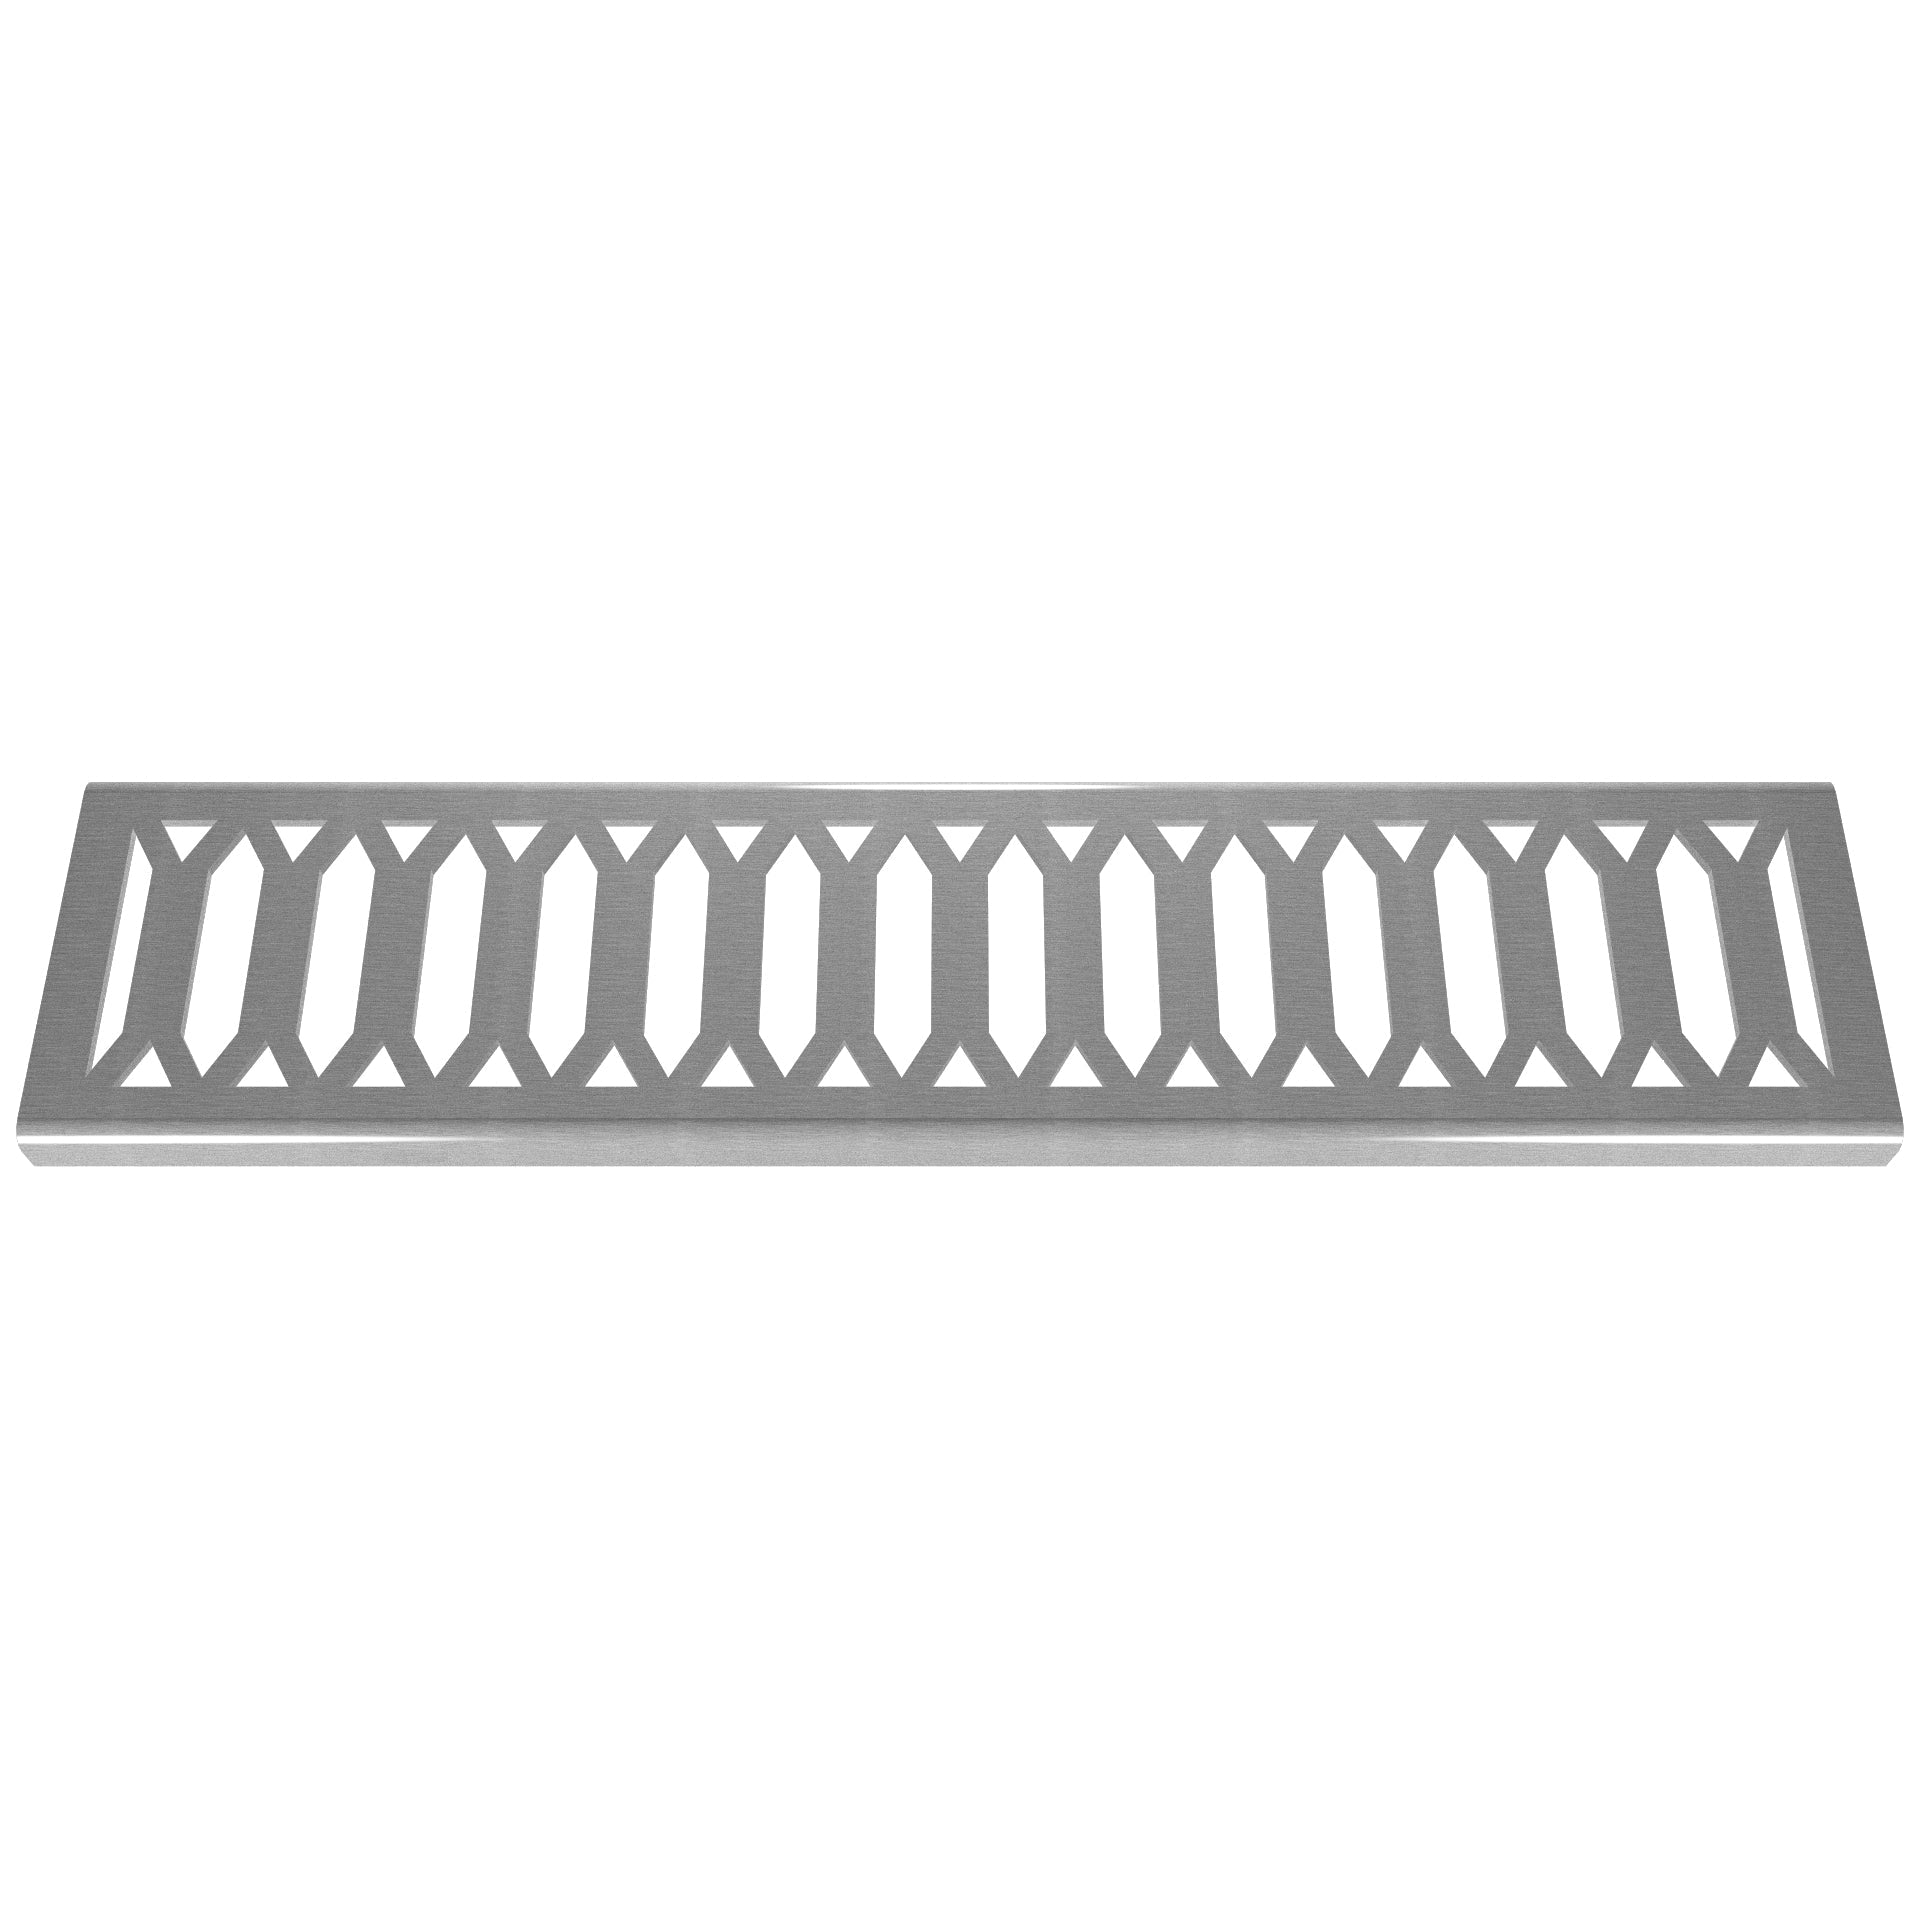 [SALE ITEM] Hexagon 304 Stainless Steel Channel Drain Grate 75 x 913mm (3 Inch)